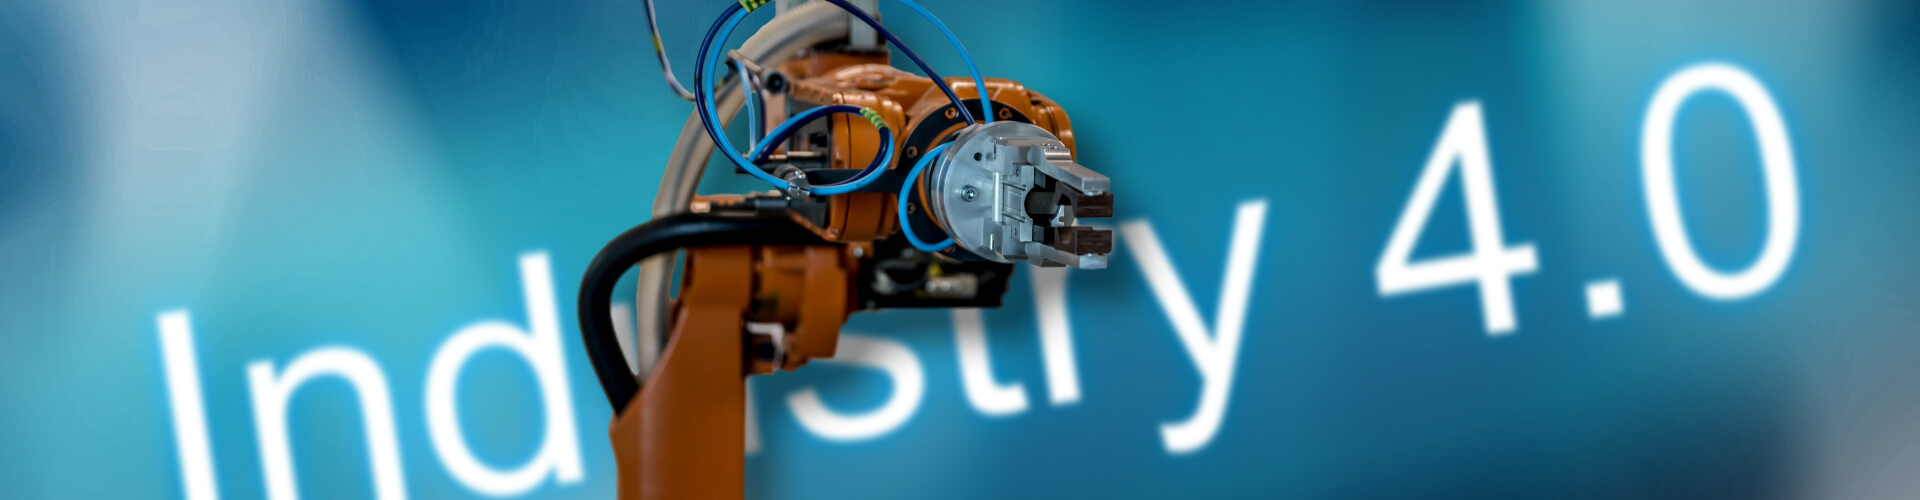 A robot arm against Industry 4.0 background